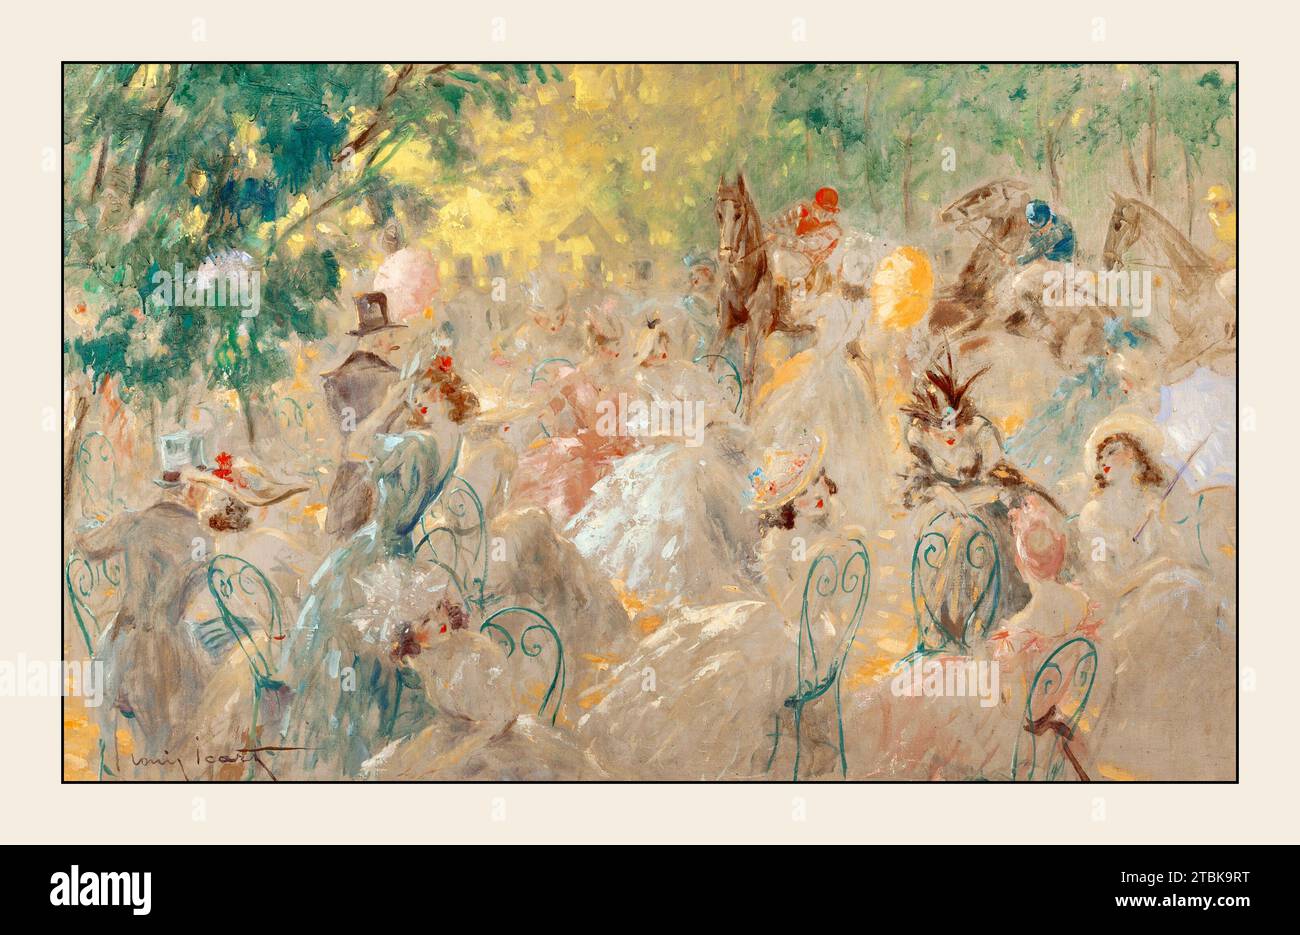 'Au Pesage, circa 1930.  A large group of gentlemen and ladies are seated as jockeys on horseback ride behind.  The women seem to chat and gossip in the peaceful but chaotic scene.' Stock Photo